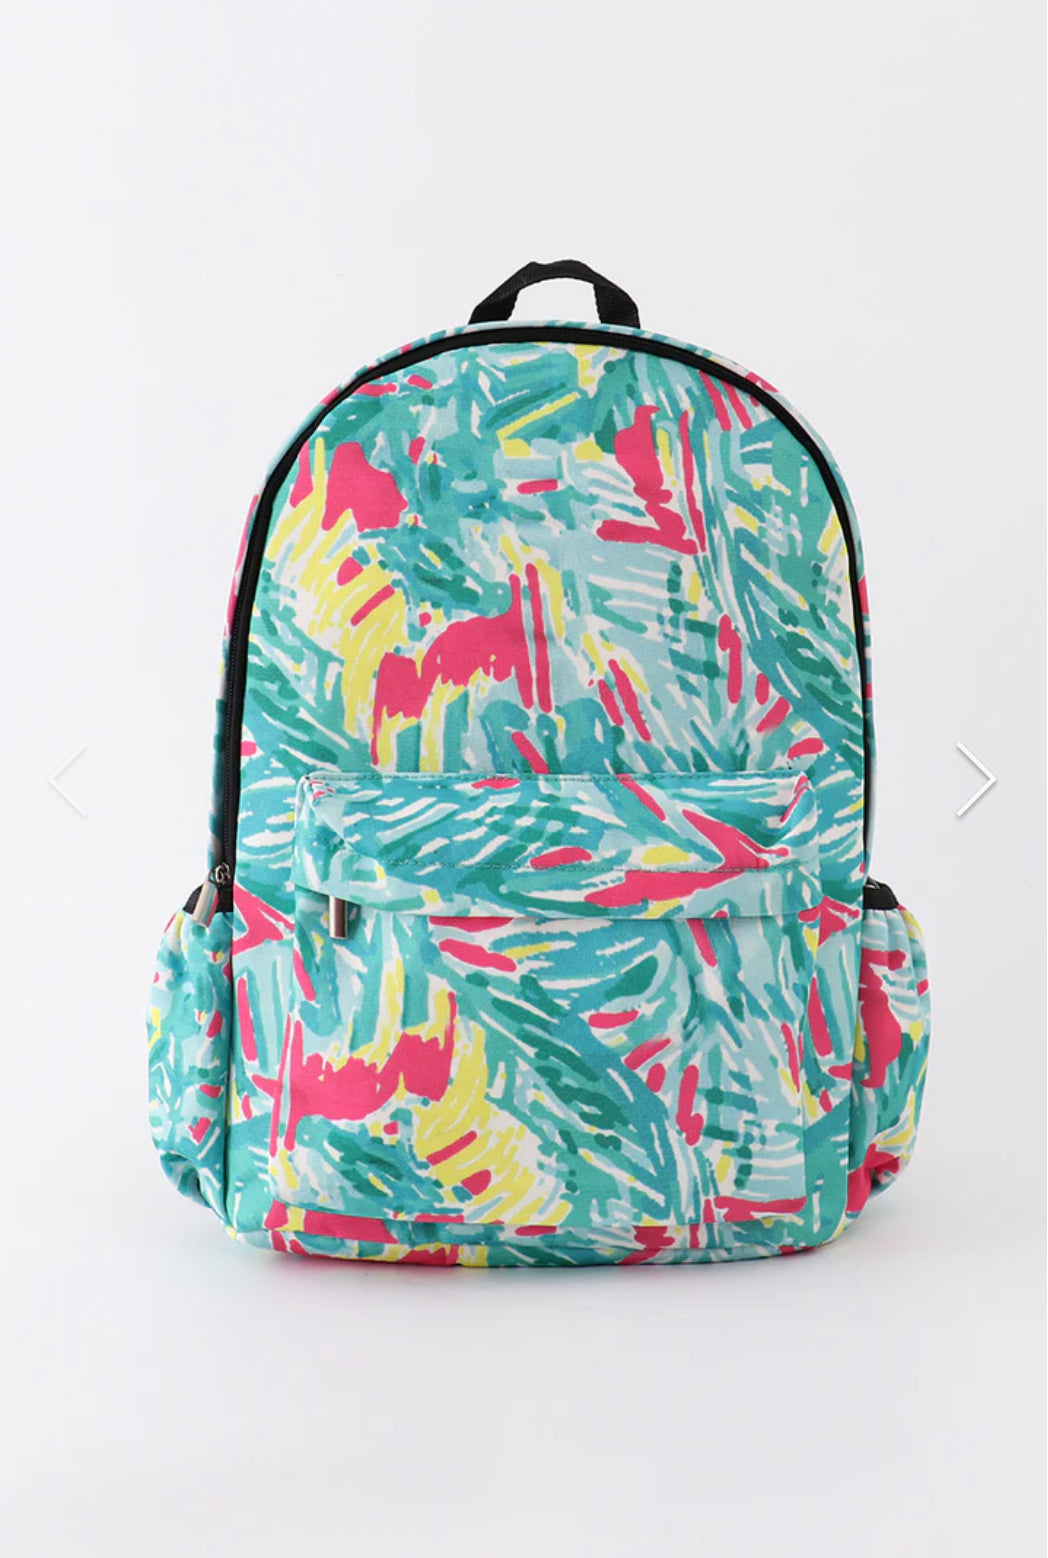 Green Lilly Print Backpack*